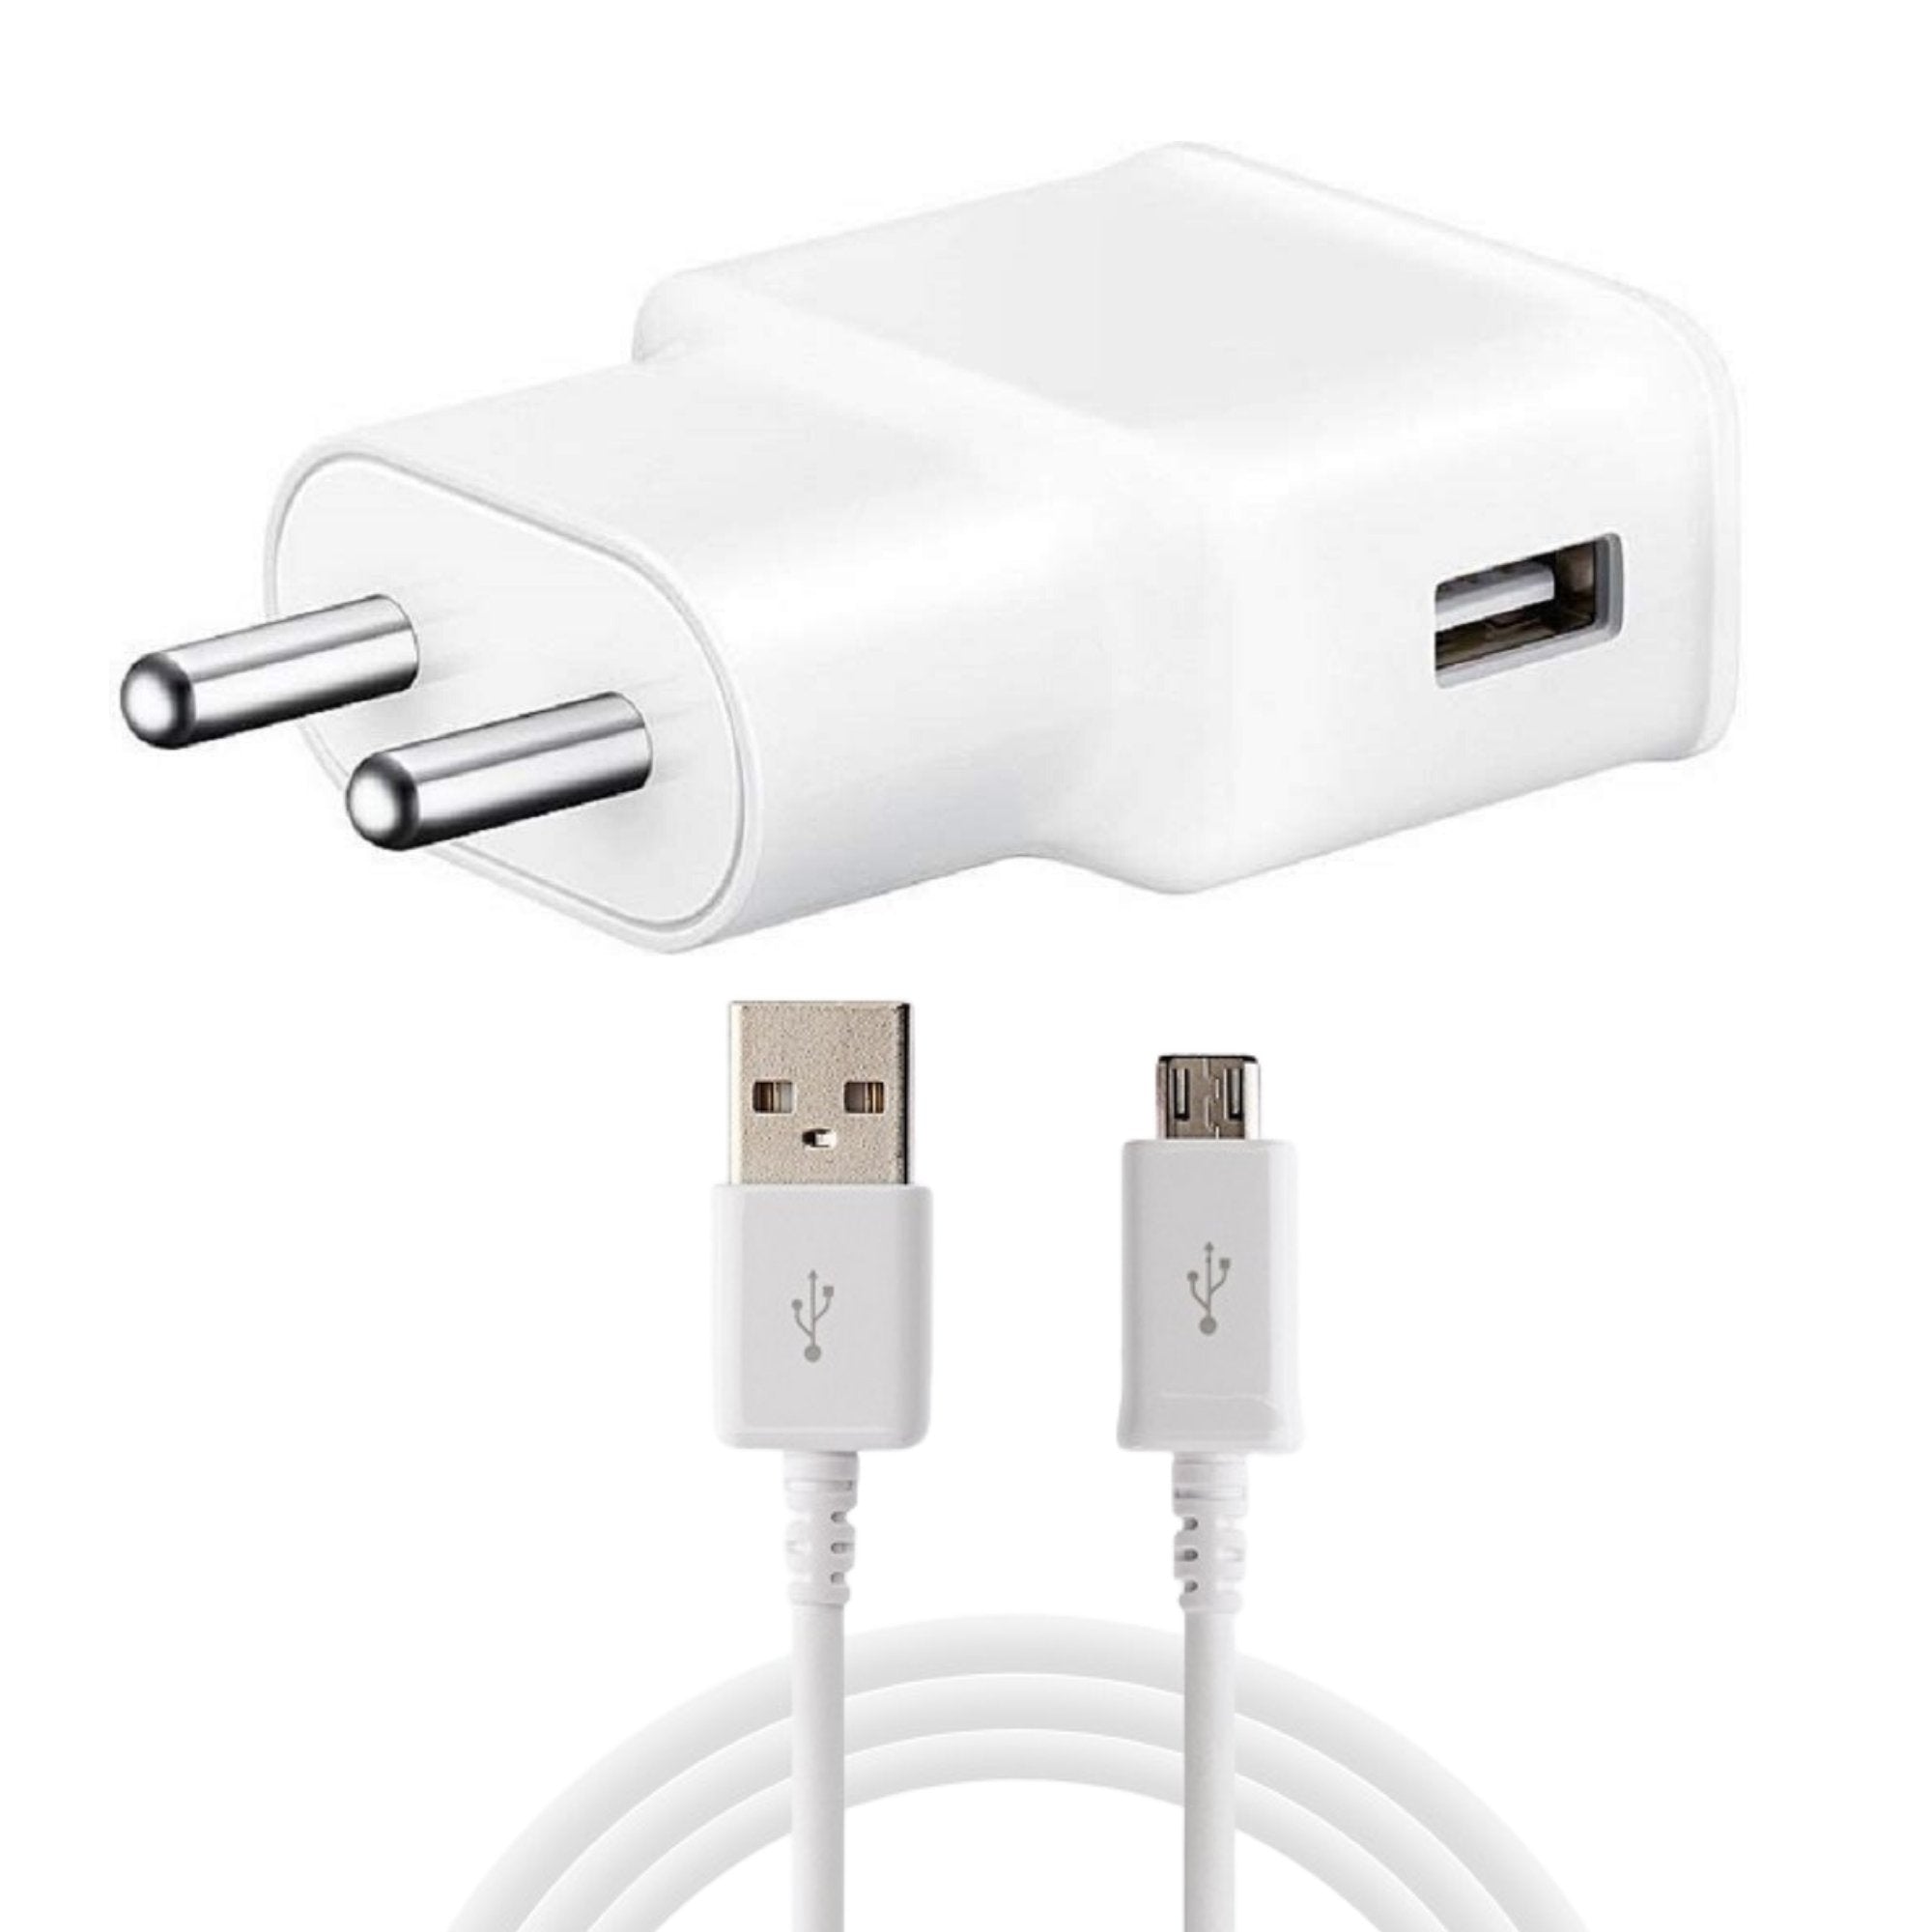 Samsung J7 Max Adaptive Mobile Charger 2 Amp With Adaptive Fast Cable White-chargingcable.in